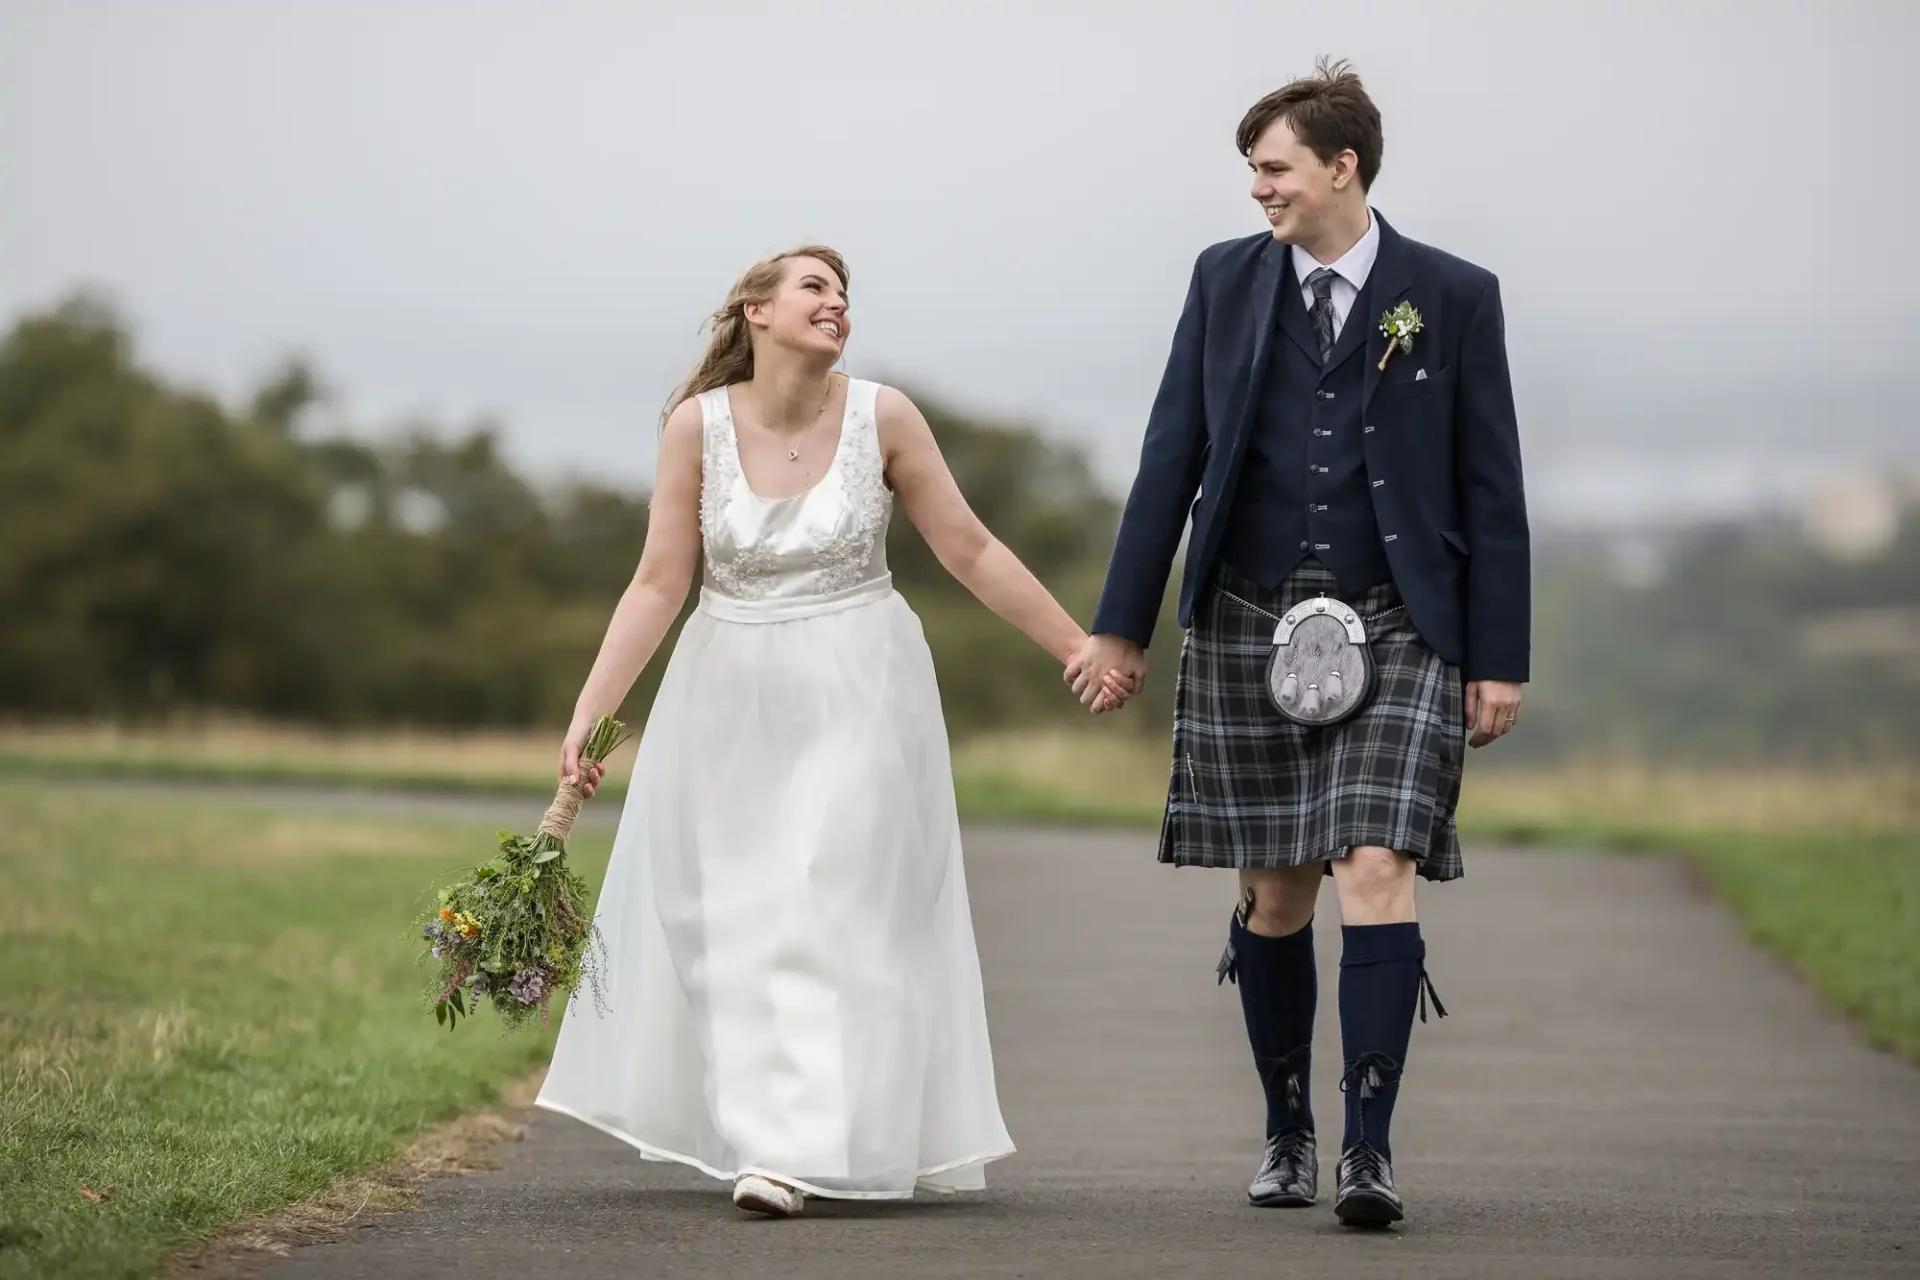 A newlywed couple walks hand in hand on a path, the bride in a white dress and the groom in a kilt, both smiling joyfully.